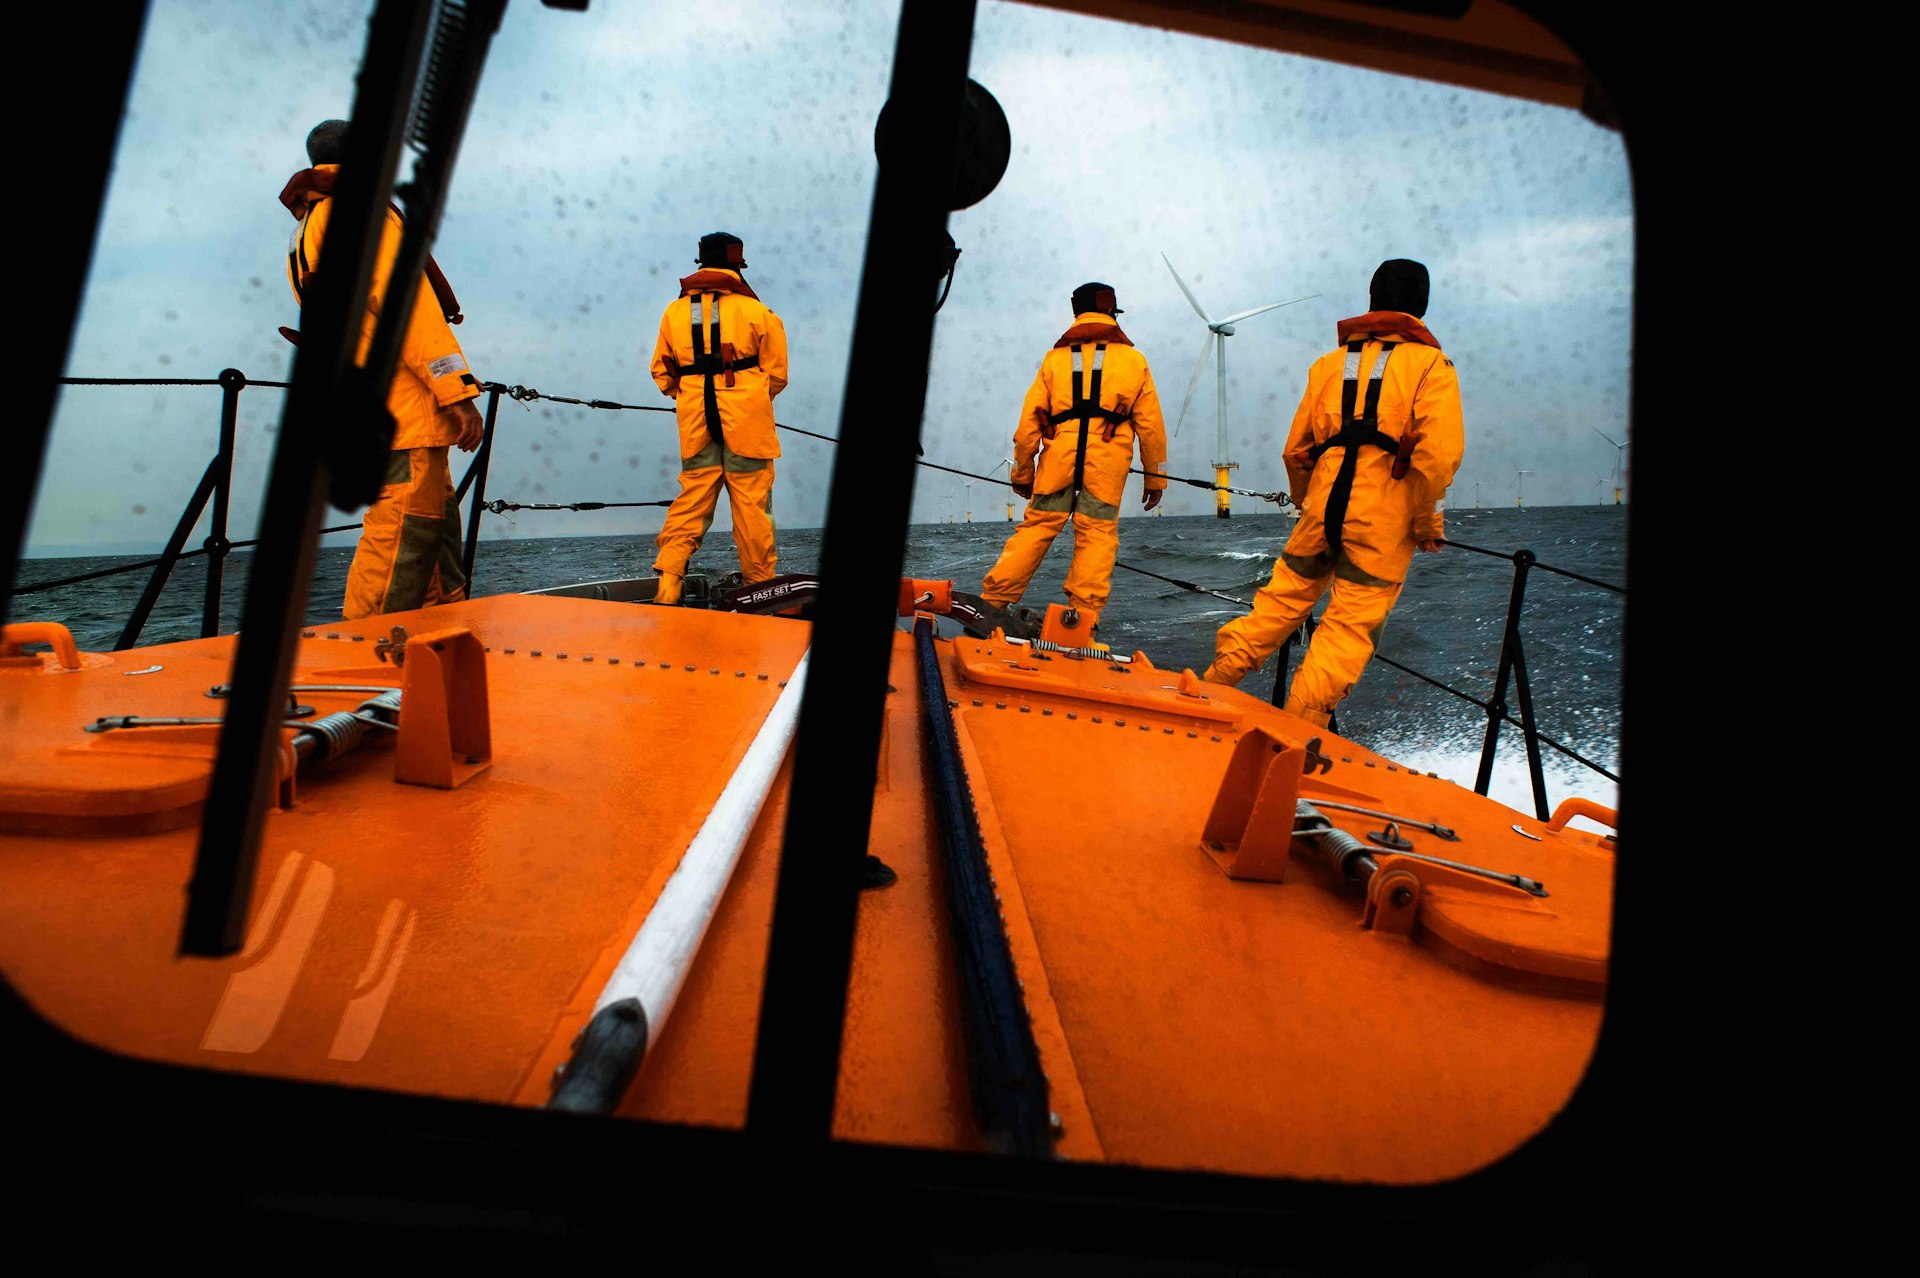 The view from the wheelhouse of the Hoylake Mersey class lifeboat Lady of Hilbre 12-005, as the crew search for a casualty in the water near the North Hoyle wind farm. Taken from The Lifeboat: Courage on our Coasts. Page 36.